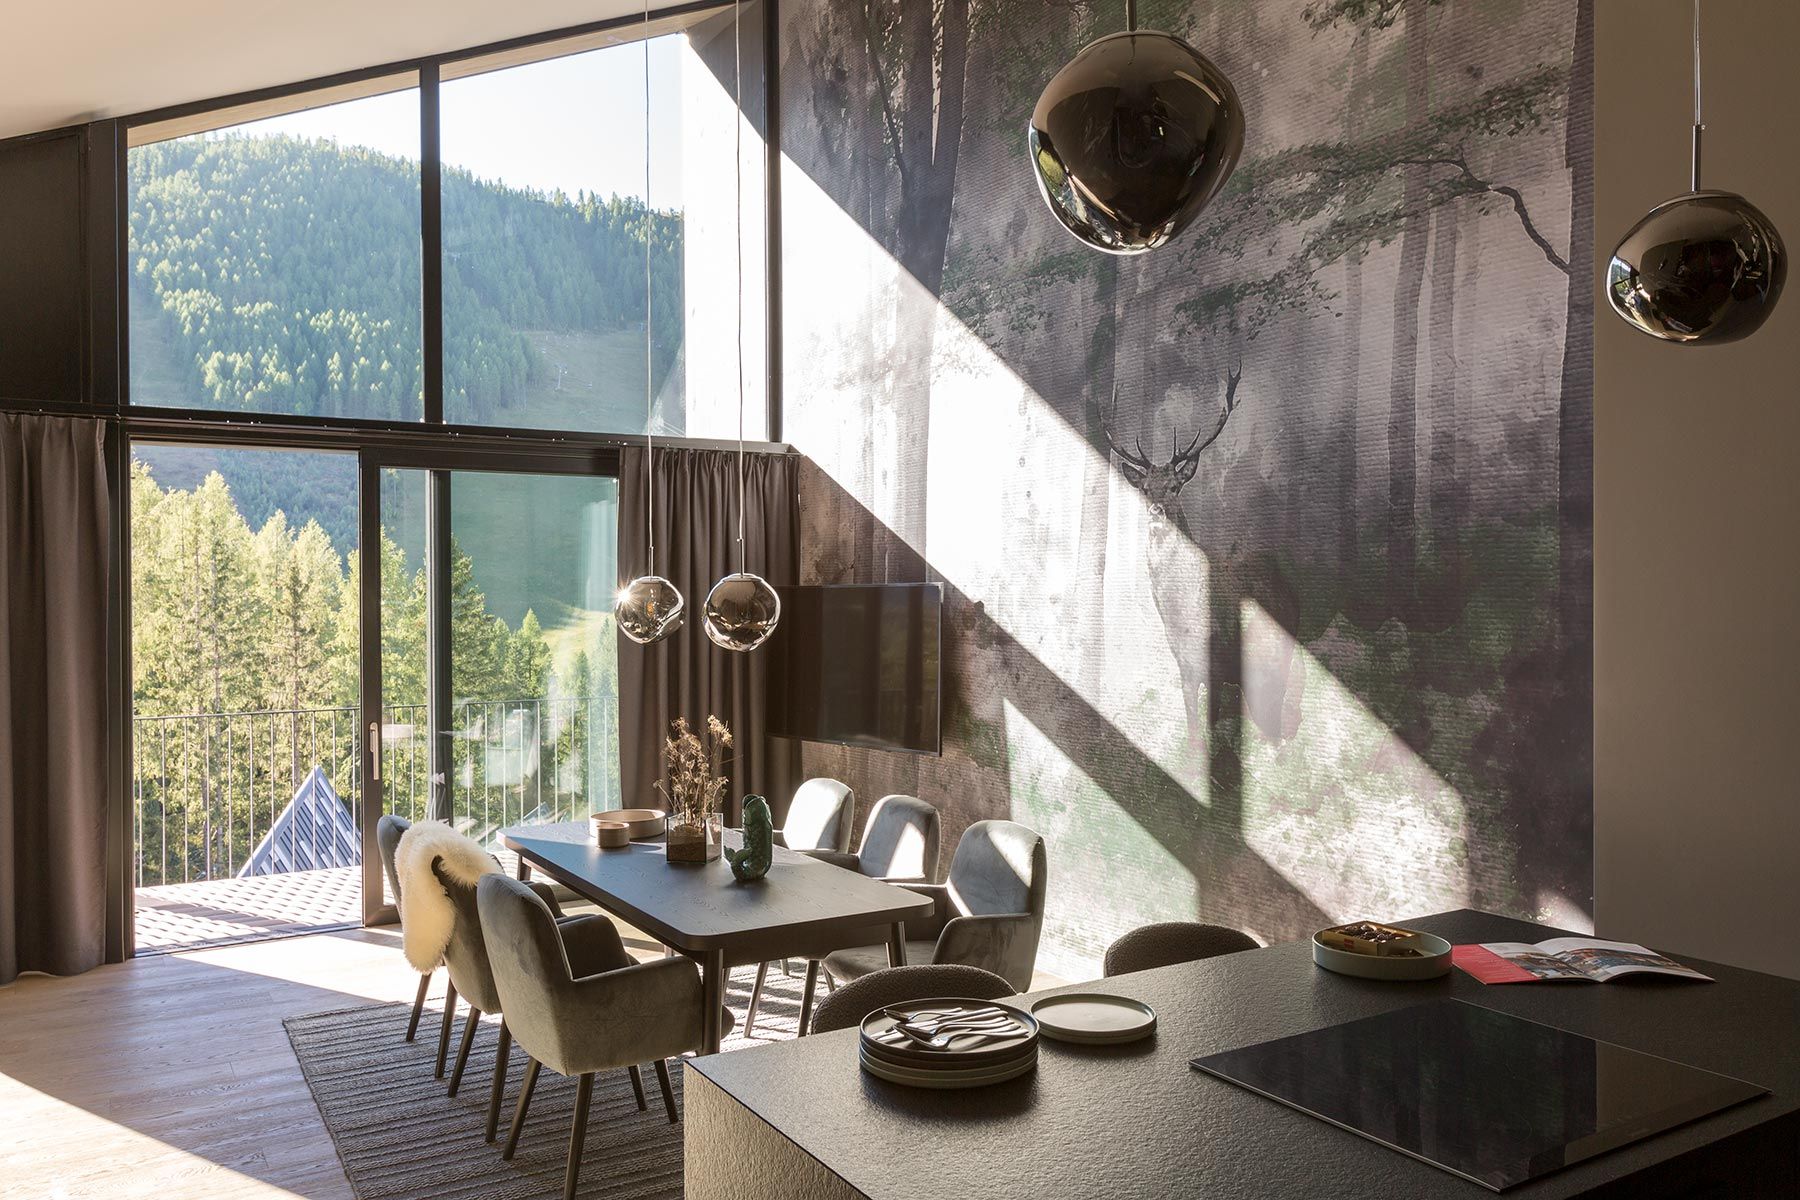 Appia project in Hinterstoder: Triforet alpin.resort chalet